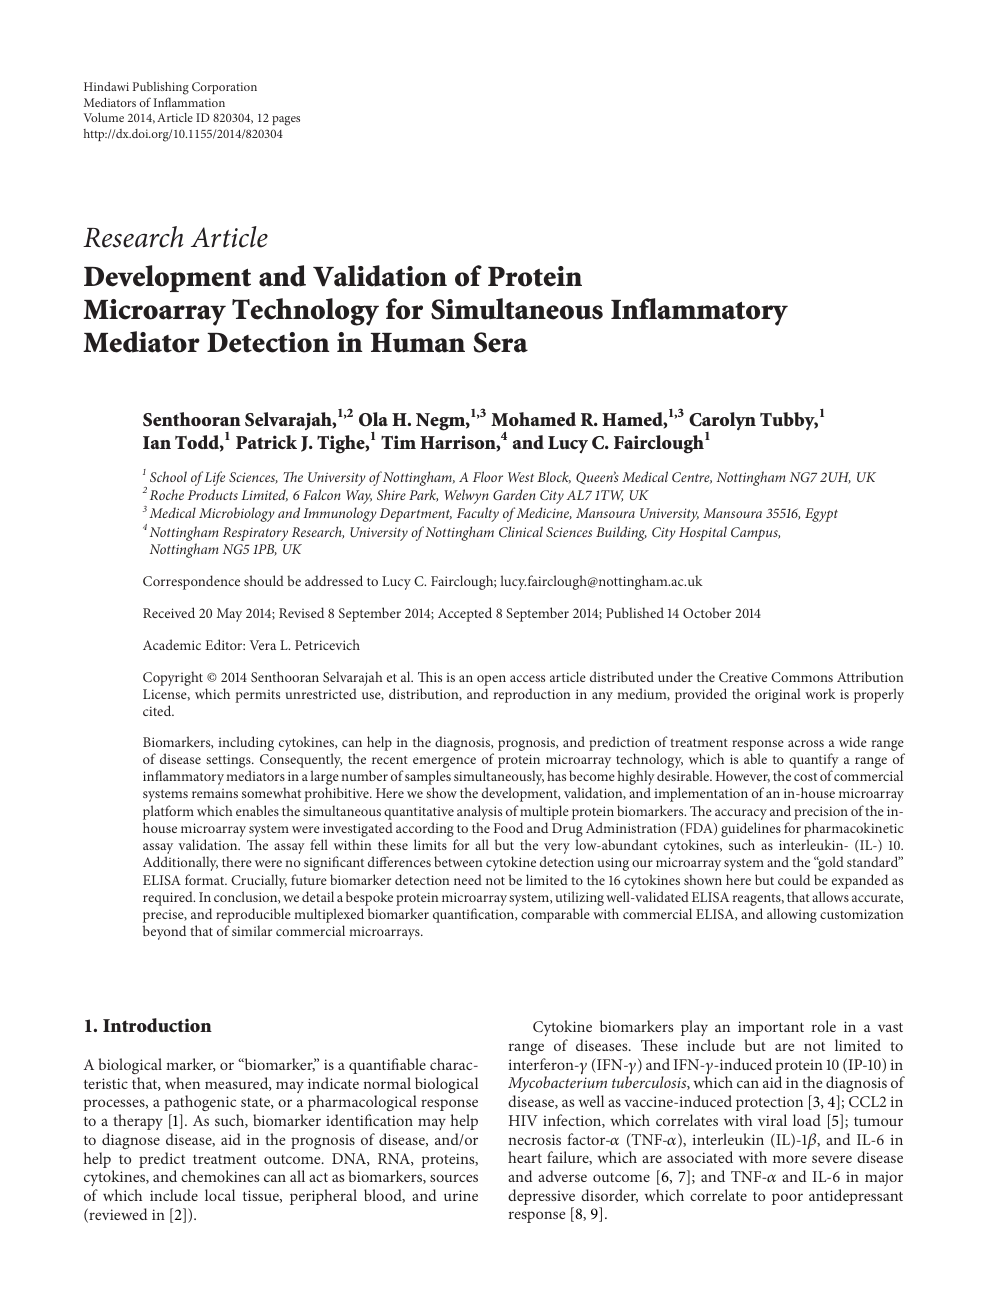 Development And Validation Of Protein Microarray Technology For